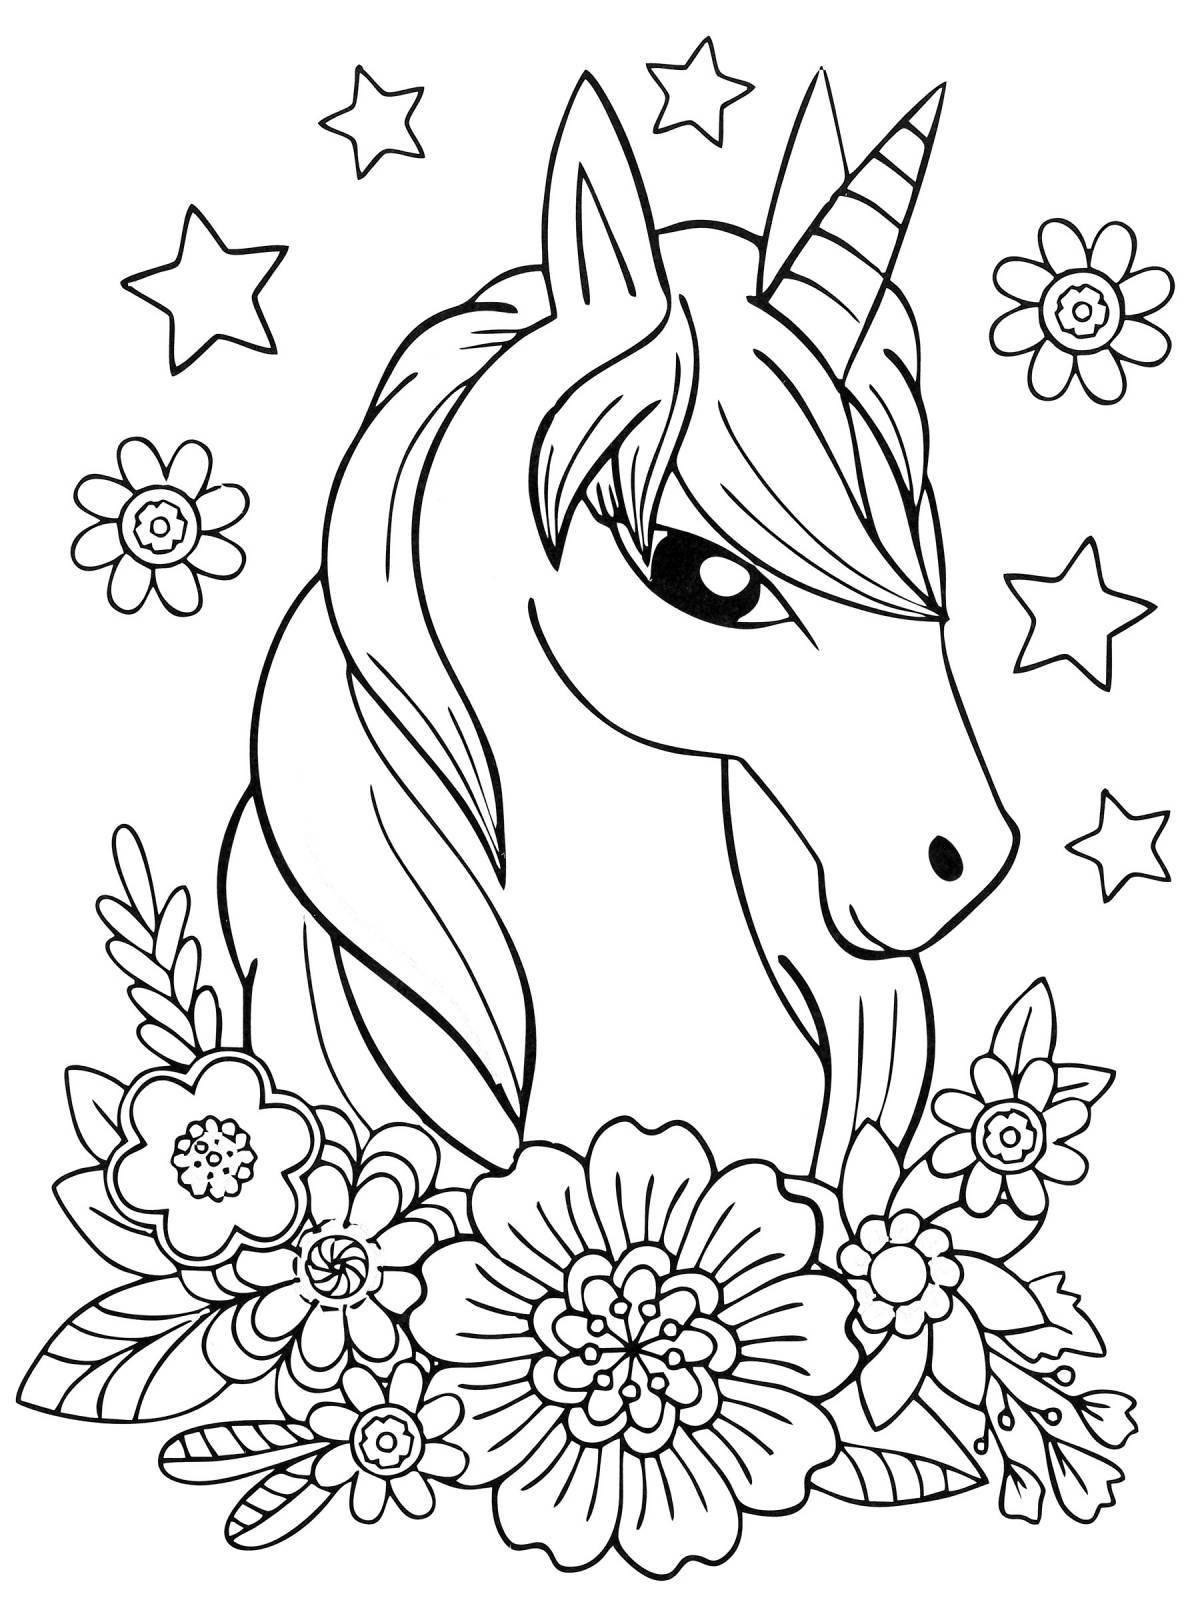 Mysterious unicorn coloring book